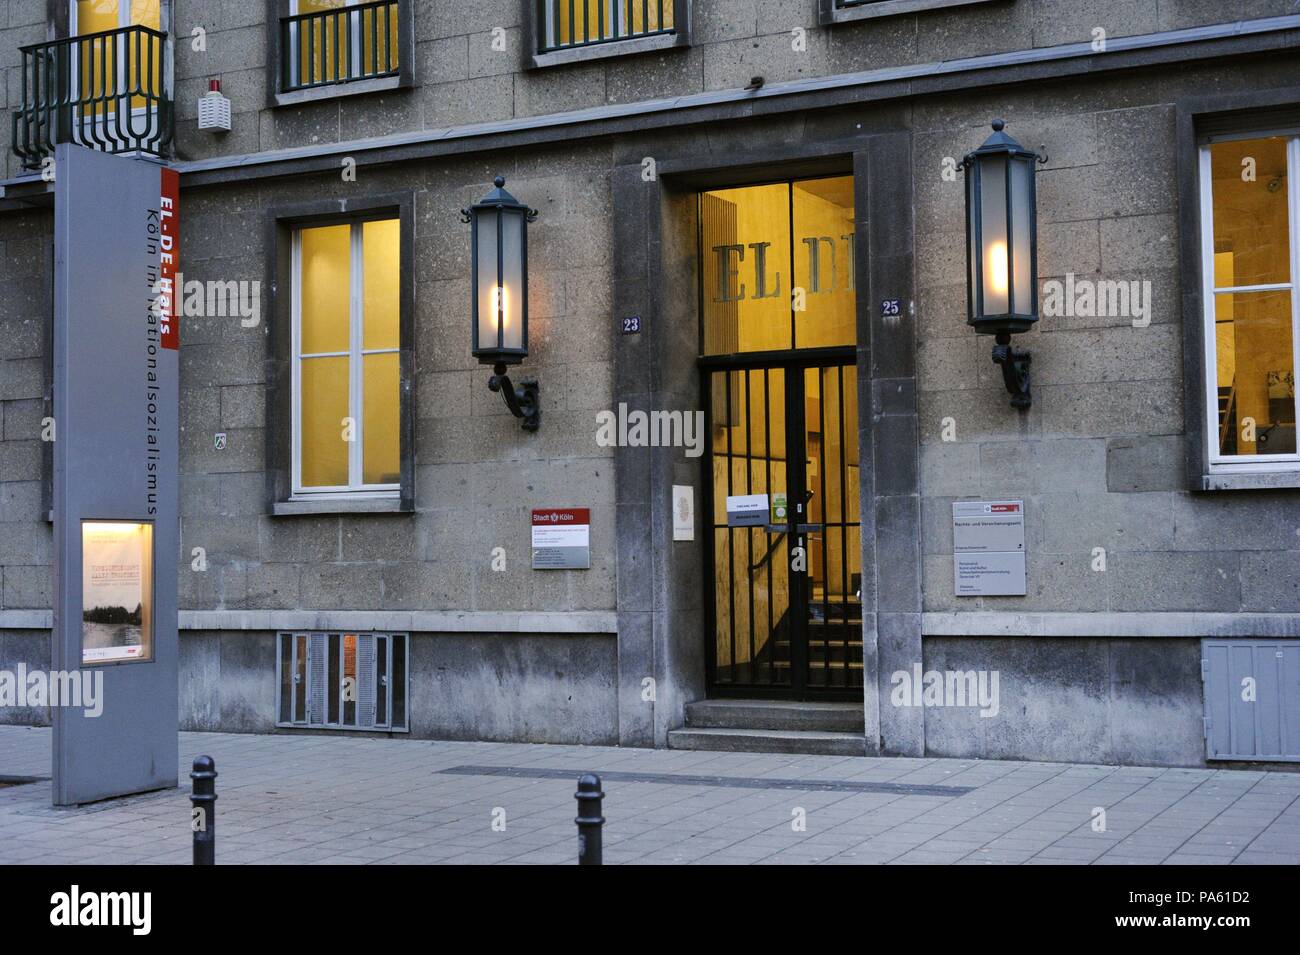 National Socialism Documentation Center. Memorial Museum of the Gestapo Prison in the EL-DE House. Founded in 1979. It was the central office of the secret police of the State (Gestapo) between 1935 and 1945. Cologne. Germany. Stock Photo